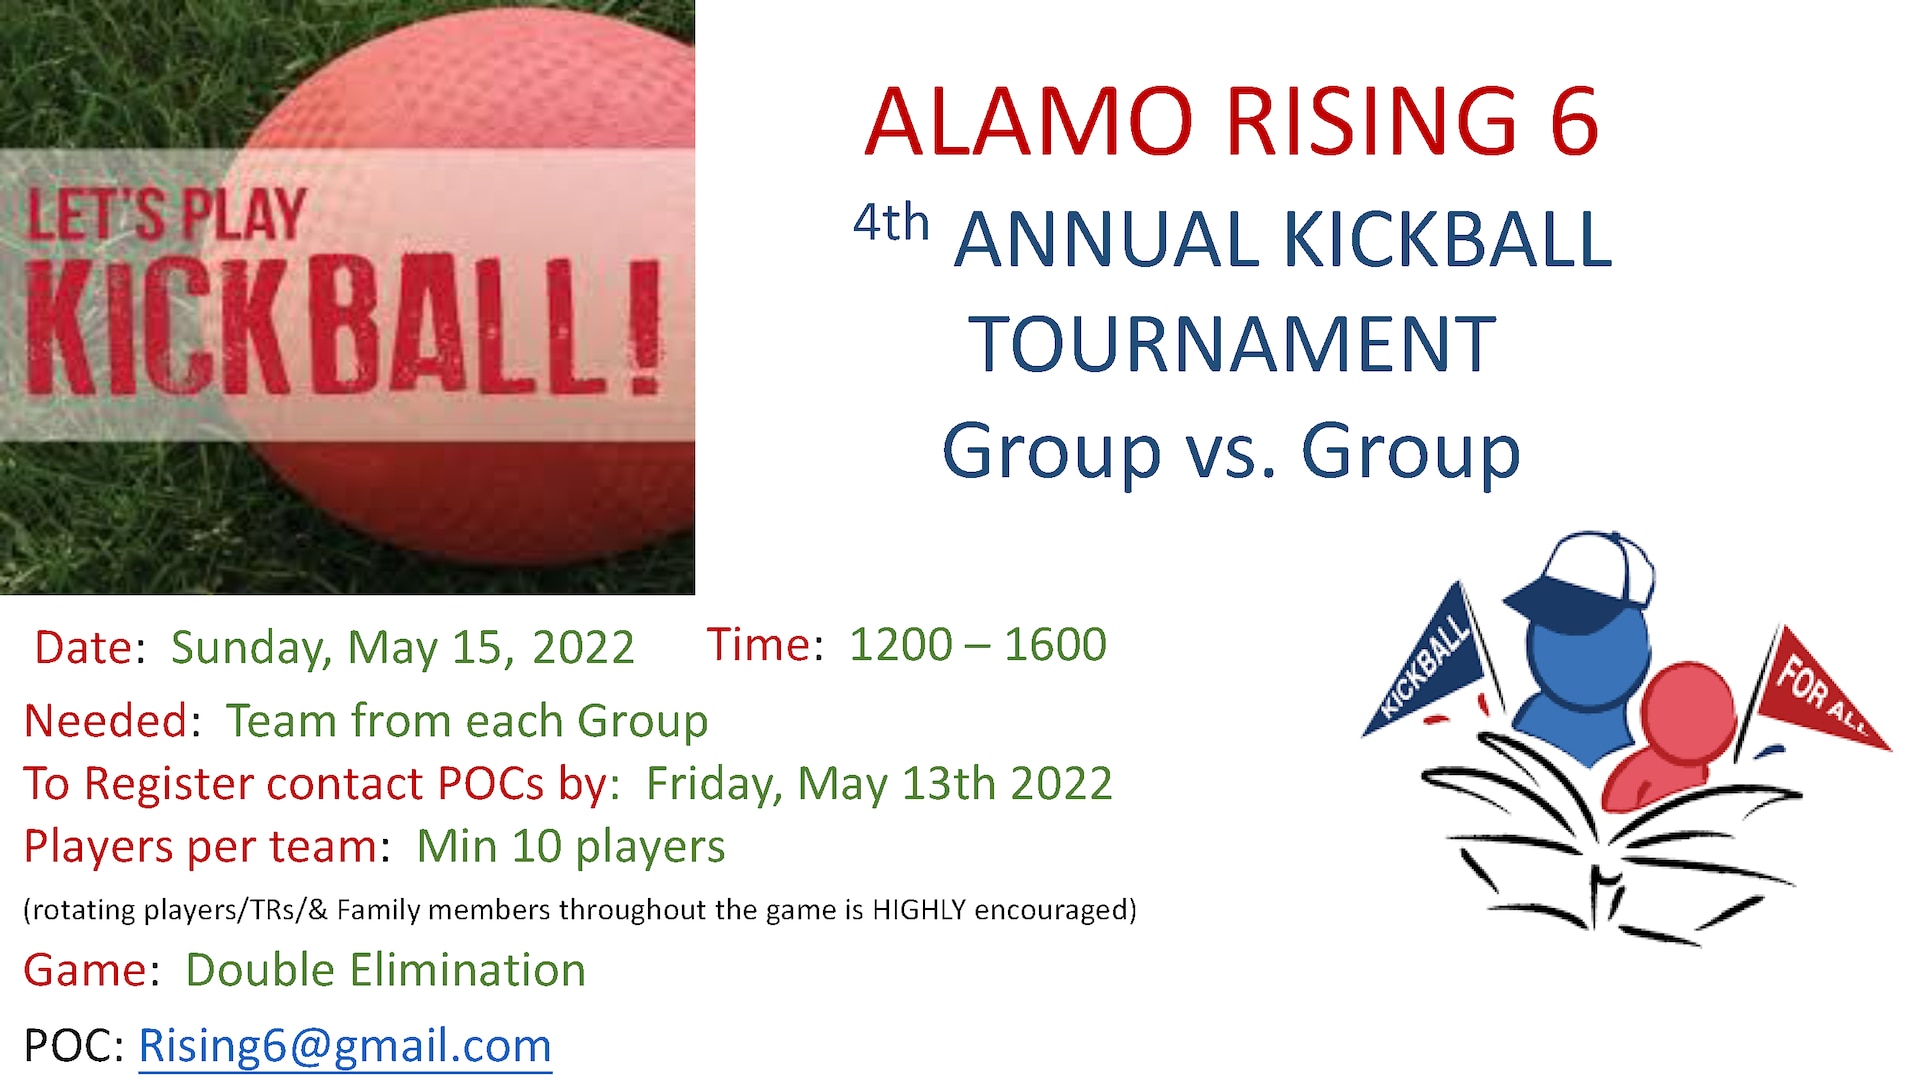 433rd Airlift Wing Family Day kickball tournament event flyer scheduled at Joint Base San Antonio-Lackland, Texas, May 15, 2022. (U.S. Air Force courtesy image)